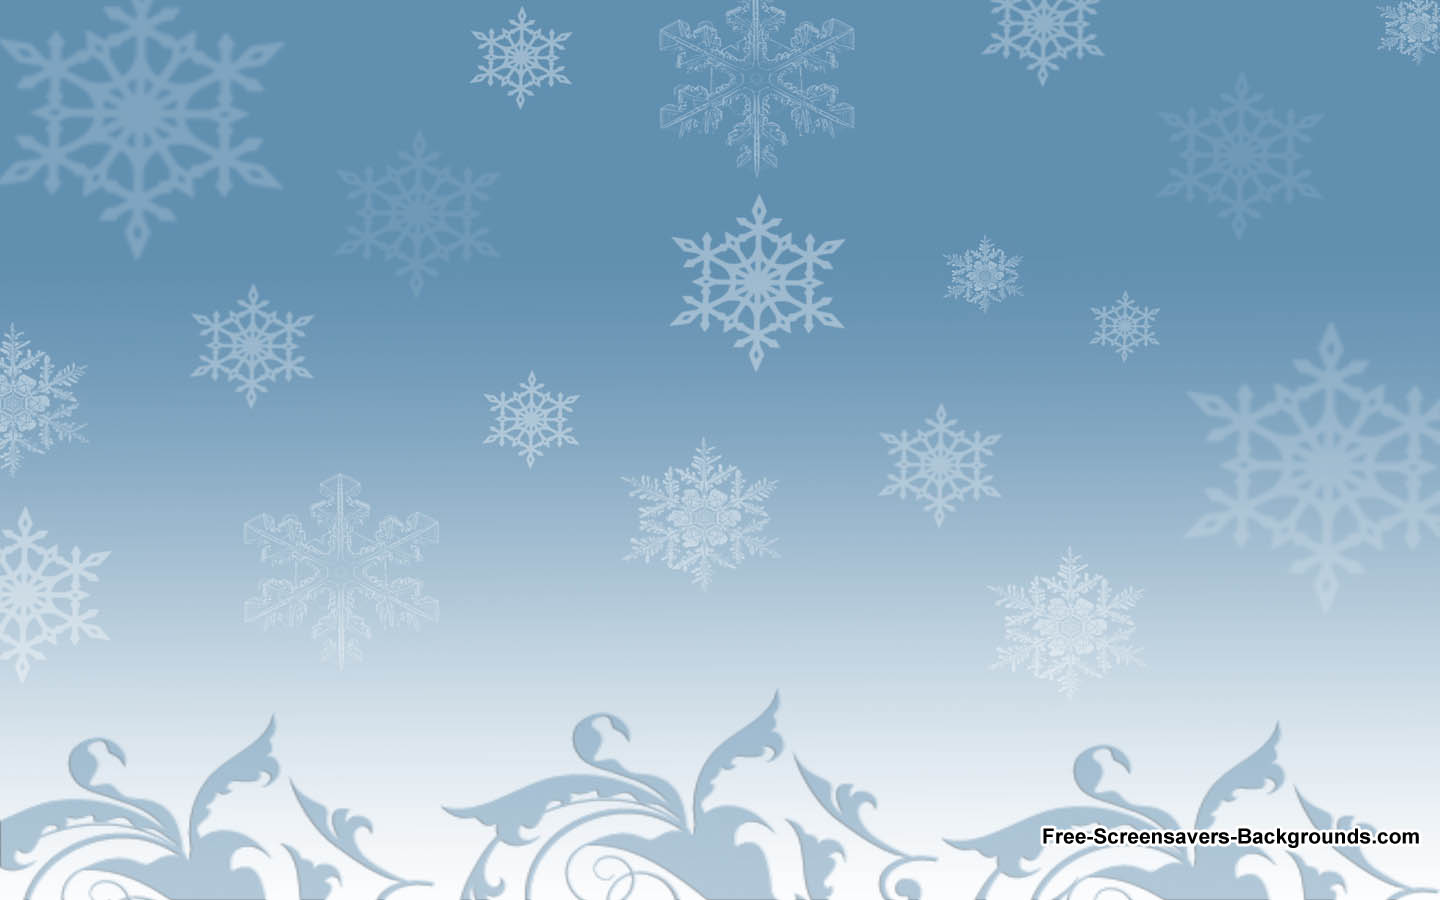 Winter Snow Screensavers And Background